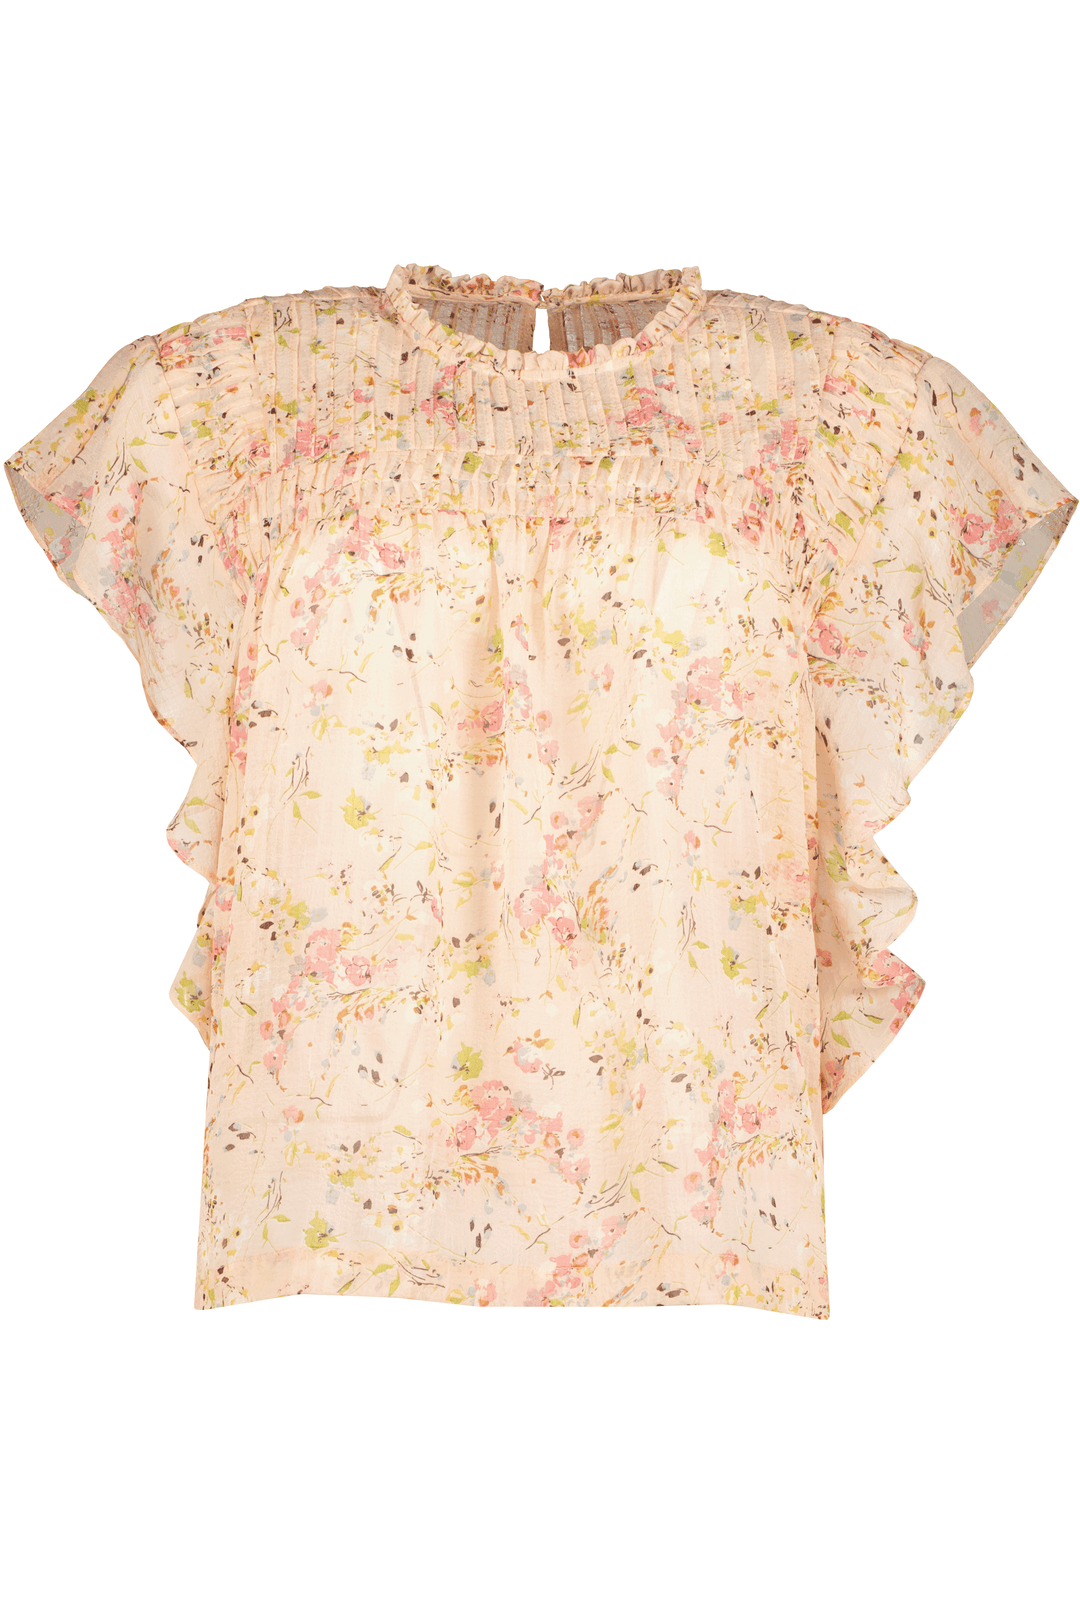 Bishop & Young | Shelby Flutter Sleeve Top | Romance Print